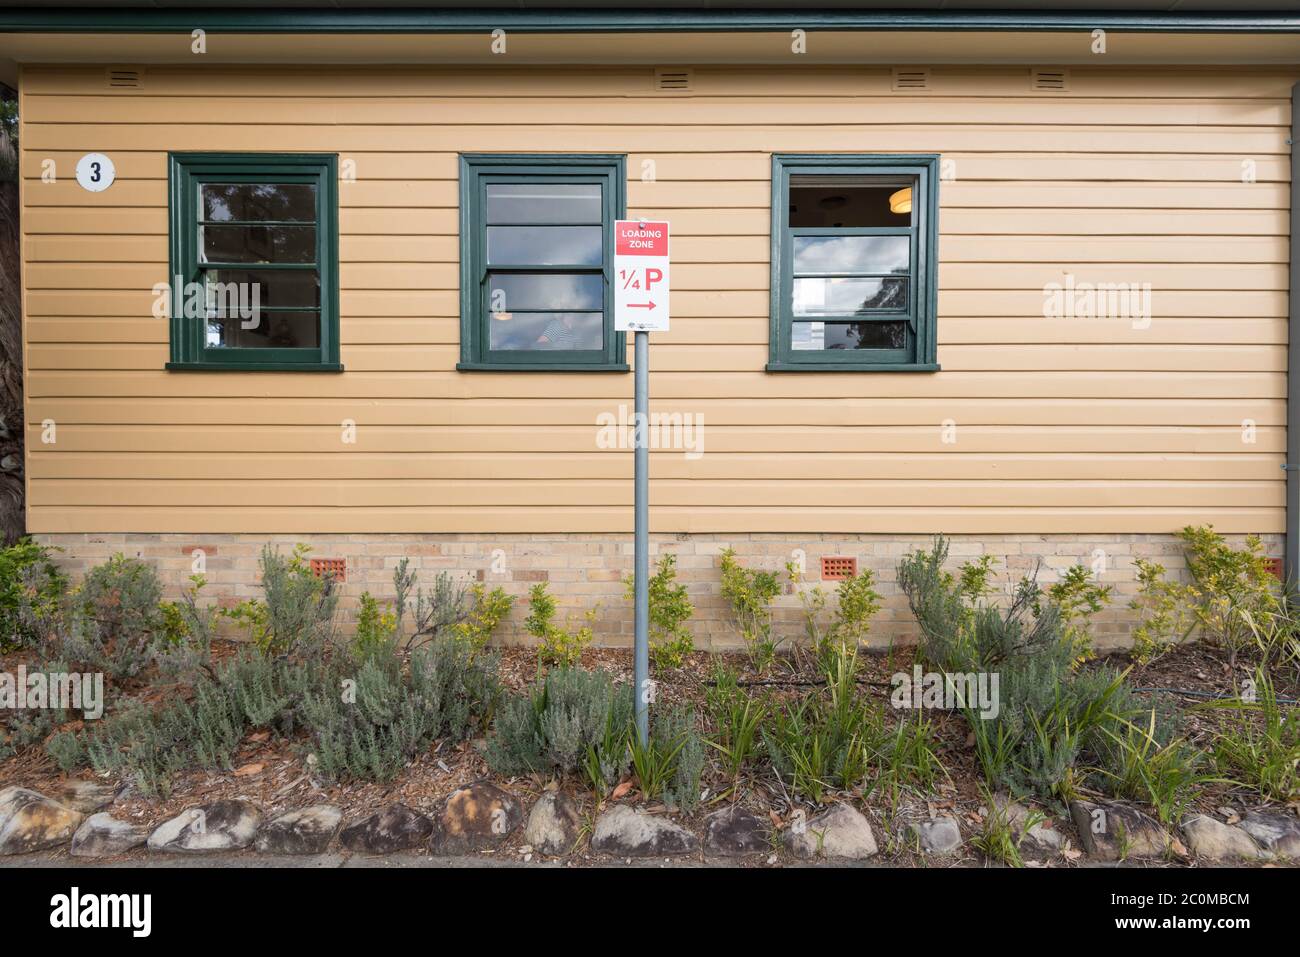 A 1/4 quarter hour parking or loading zone sign in a small garden outside a timber building at Middle Head, Sydney Stock Photo